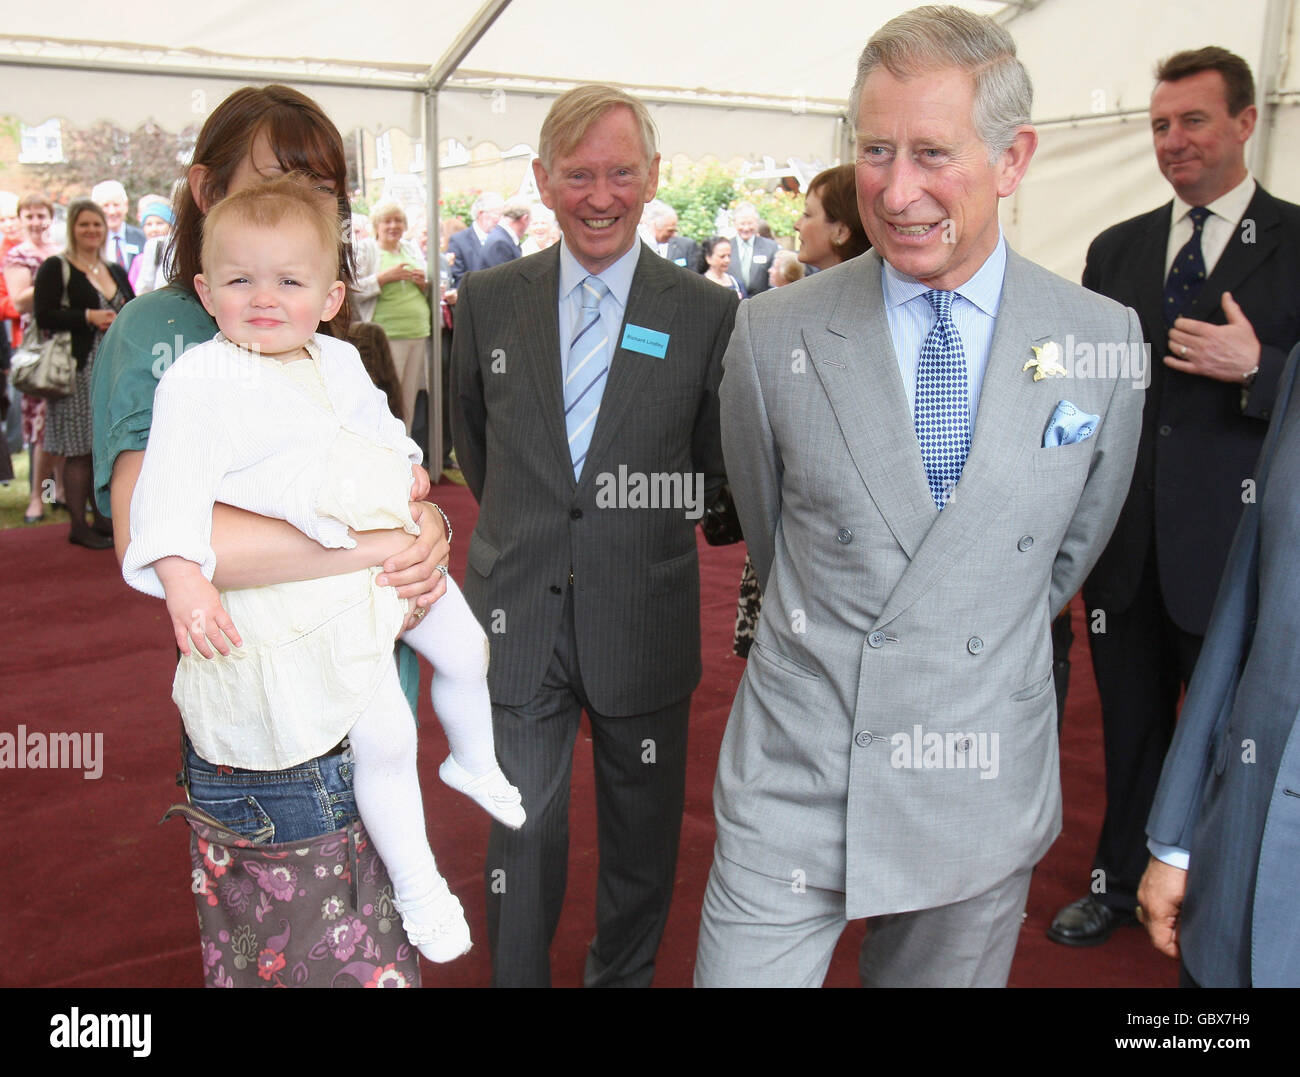 The Prince of Wales, patron of the Almshouse Association, during a visit to St Pancras almshouses in north London to celebrate the 150th anniversary of the Almshouses. Stock Photo